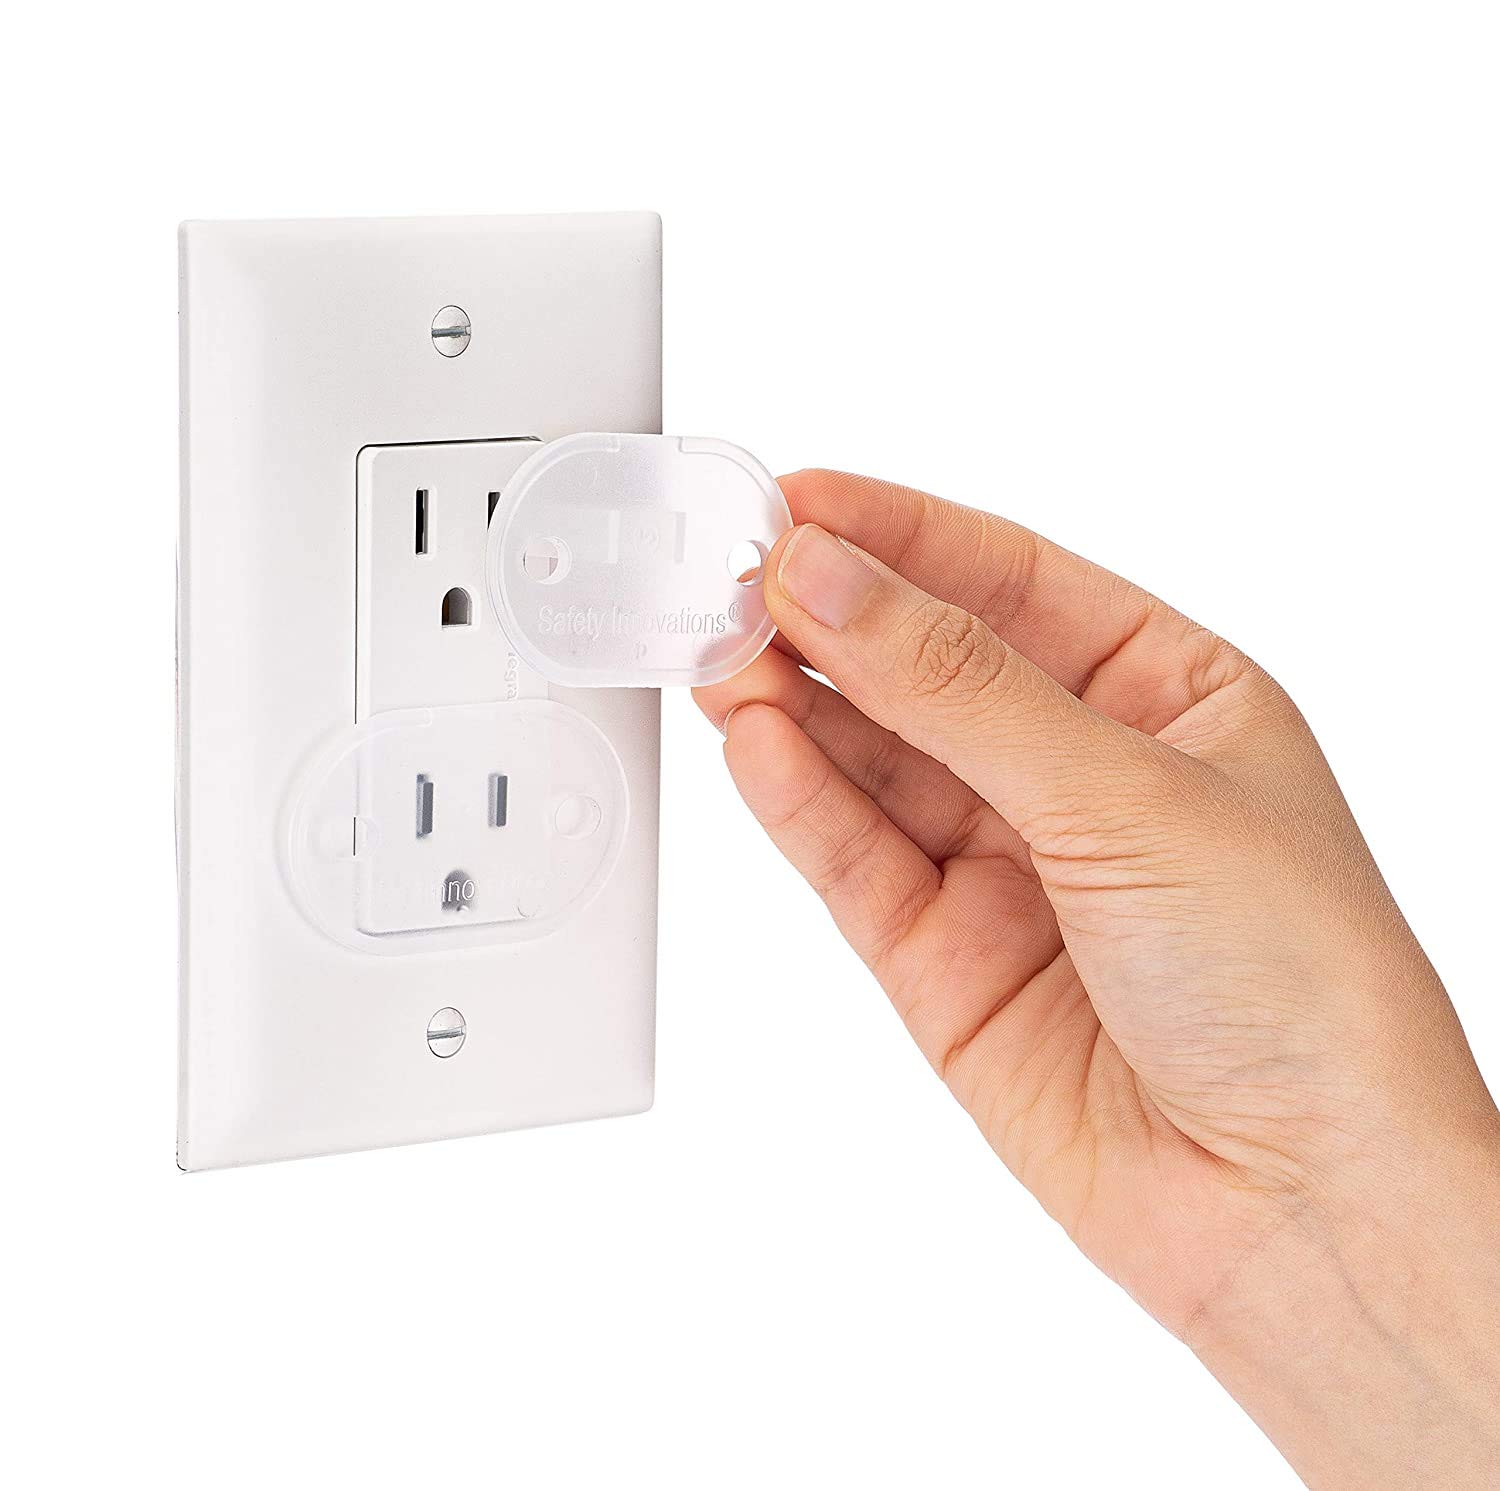 Safety Innovations, Ultimate Outlet Safety cap, Baby Proofing Outlet Plugs, child Safety Electrical Outlet covers, Easy Installa